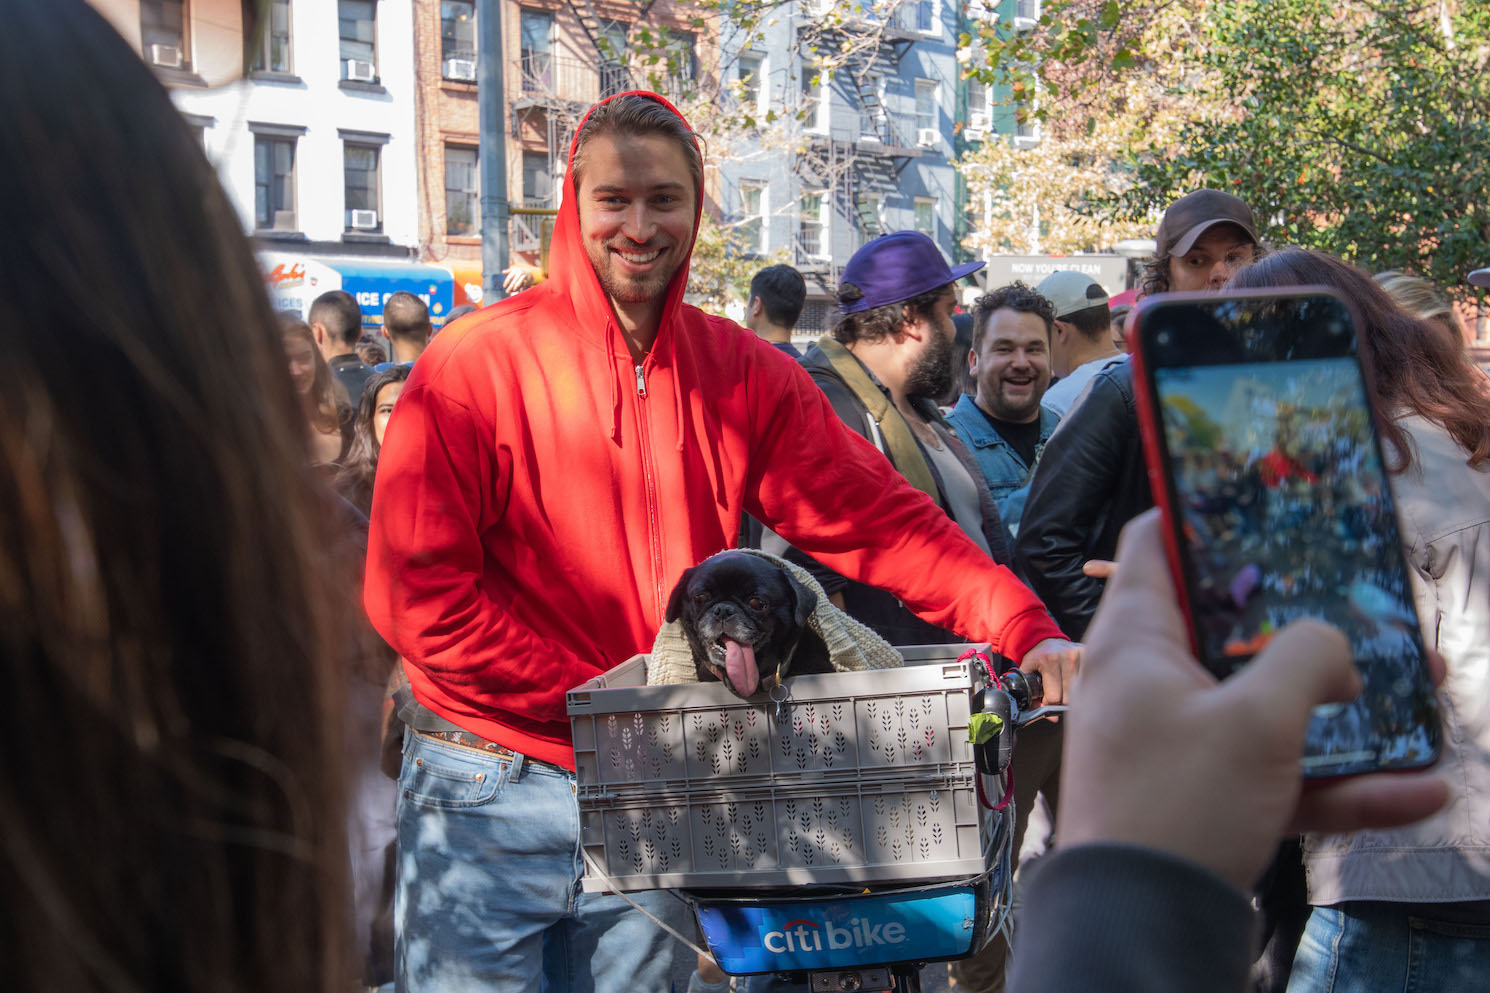 A man wearing a red hooded zip-up sweatshirt smiles for a photo in Tompkins Square Park, holding a Citi Bike that has a gray basket attached to the front. A black pug with its tongue out sits inside the basket. A gray knit blanket is draped over the dog, and there's a hand holding a phone on the right taking a photo of the dog and the owner.